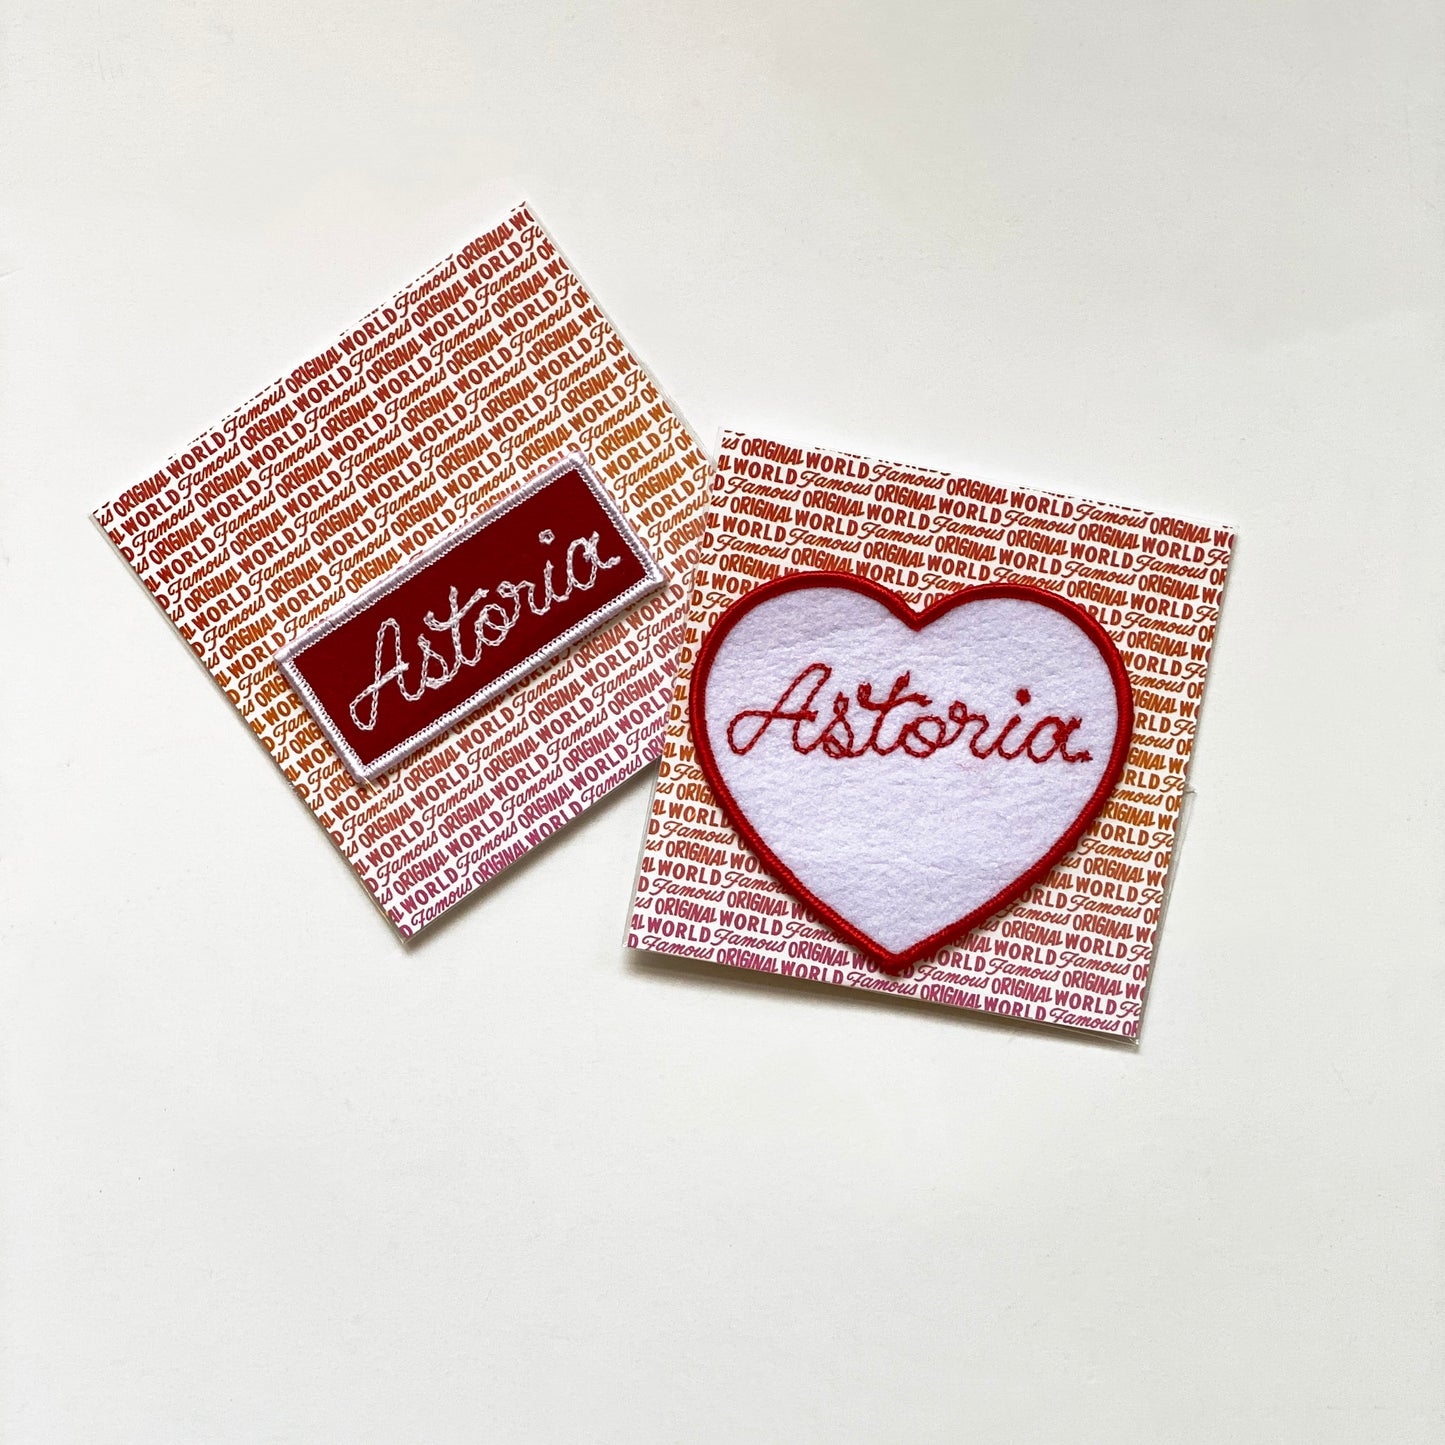 Handmade, custom "Astoria" heart in white felt with red embroidery and "Astoria" rectangle red felt patch with white embroidery, mounted on World Famous Original packaging. 